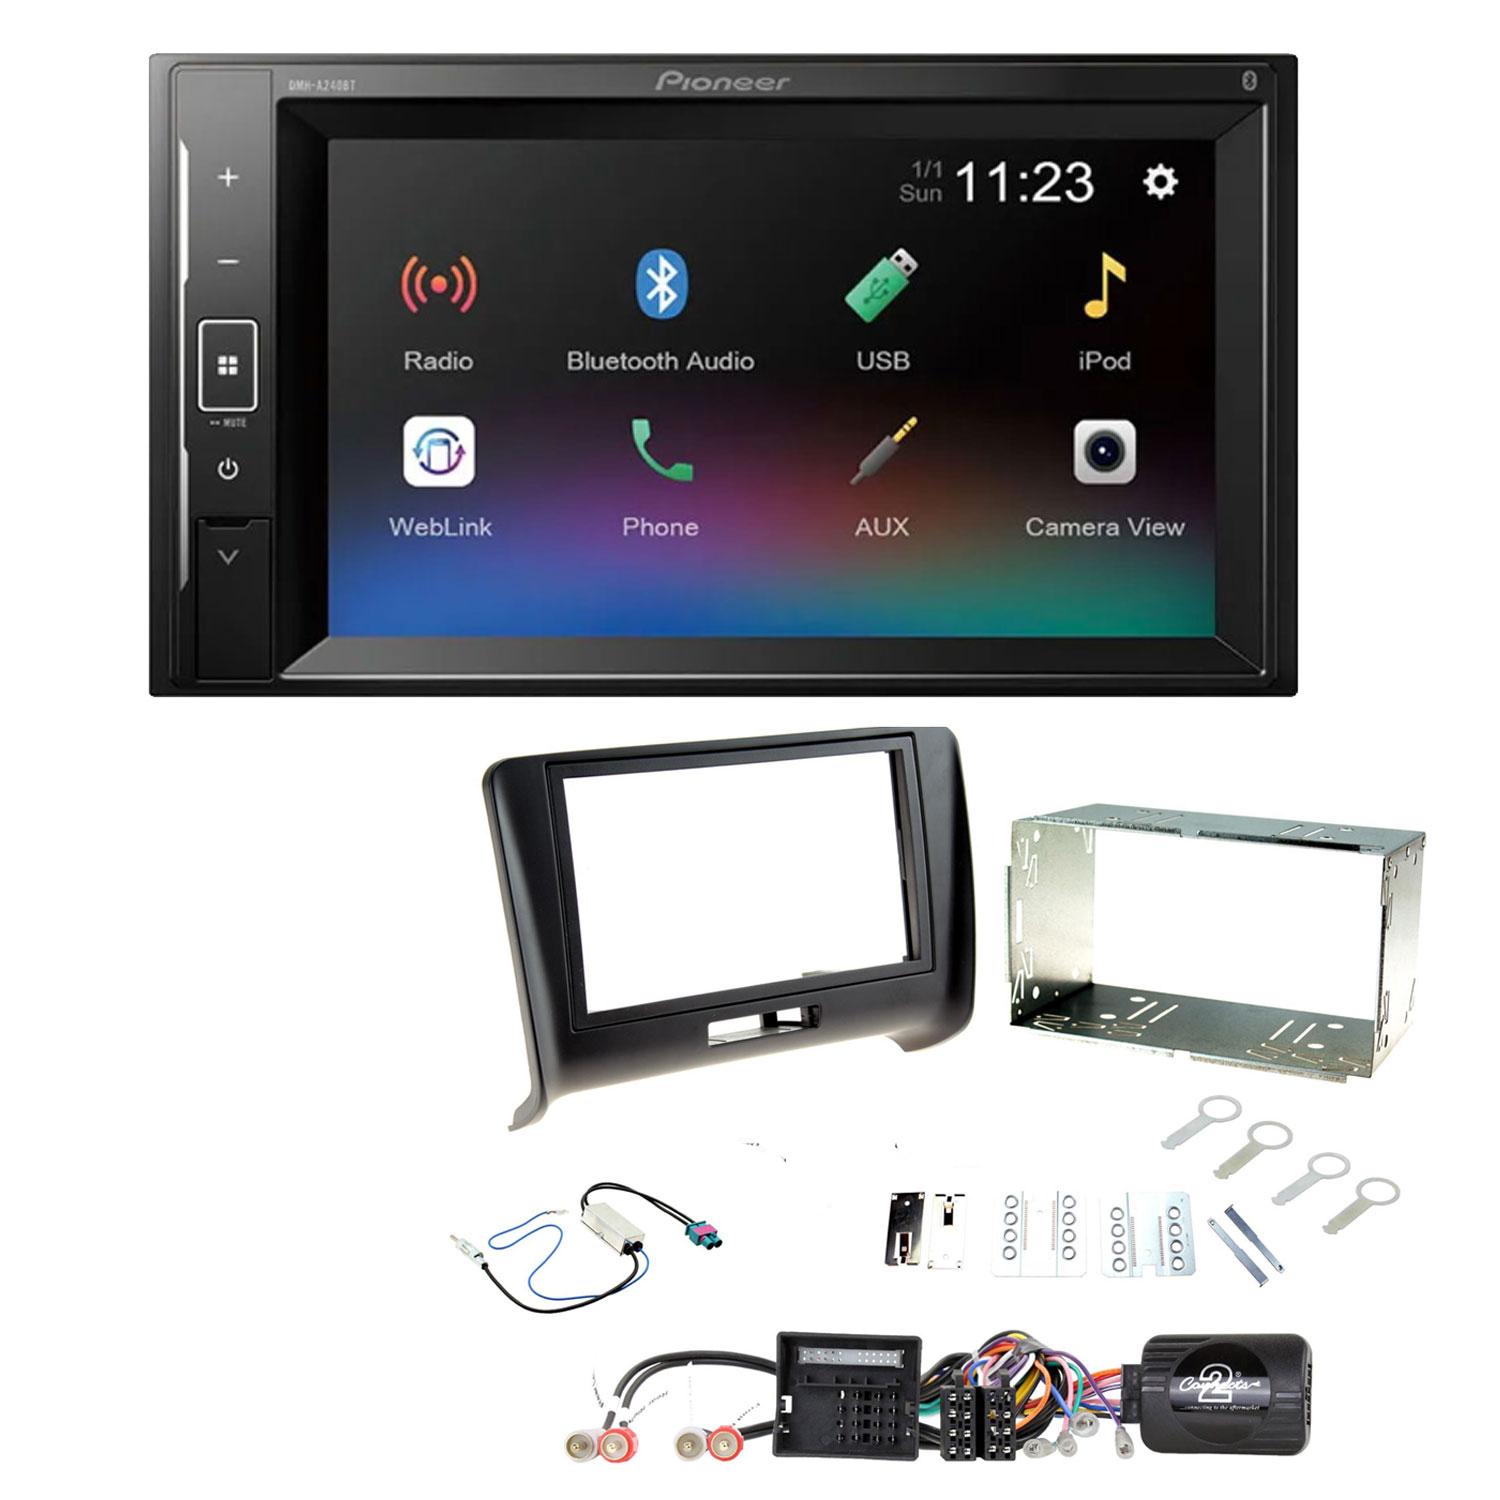 Audi TT 2006 - 2014 Pioneer 6.2" Touch Screen Bluetooth iPod iPhone Stereo Upgrade Kit